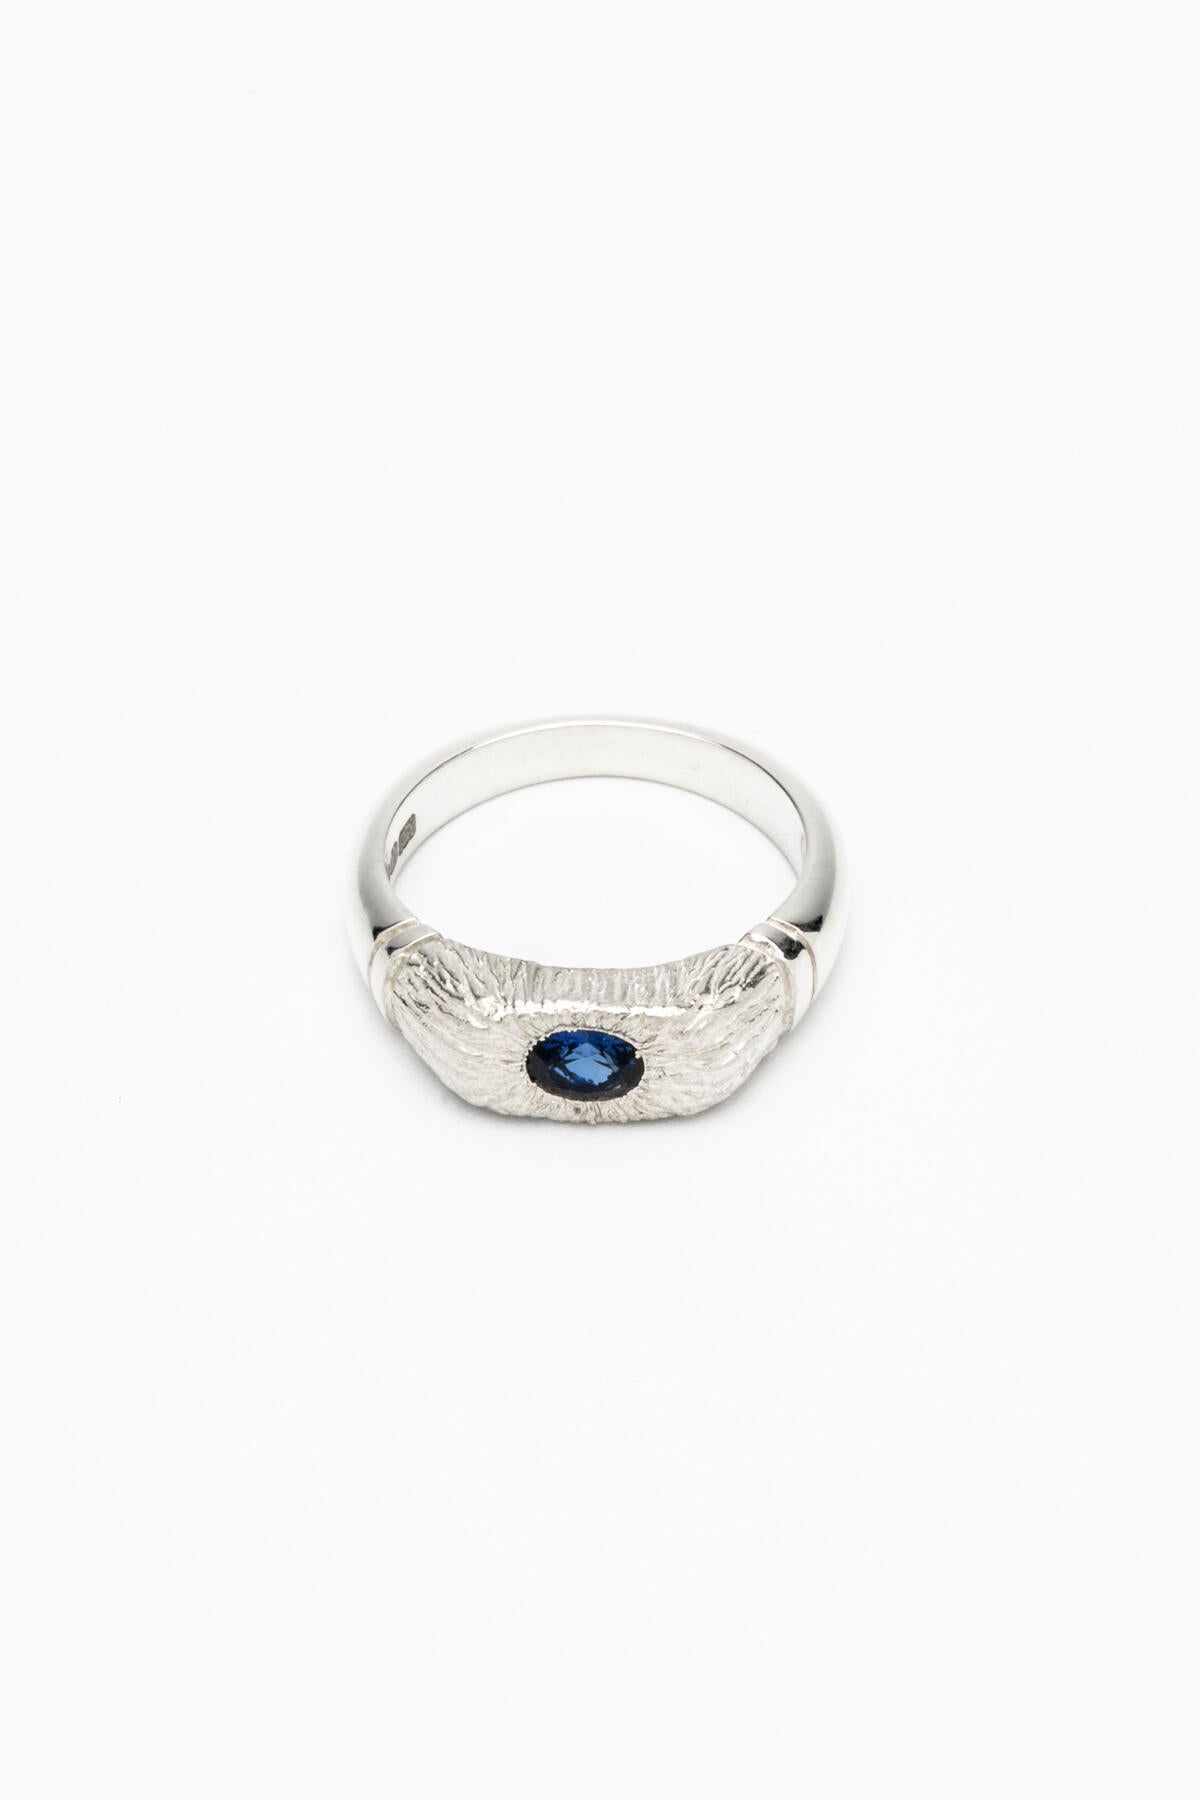 Hand Me Down Ring - Blue